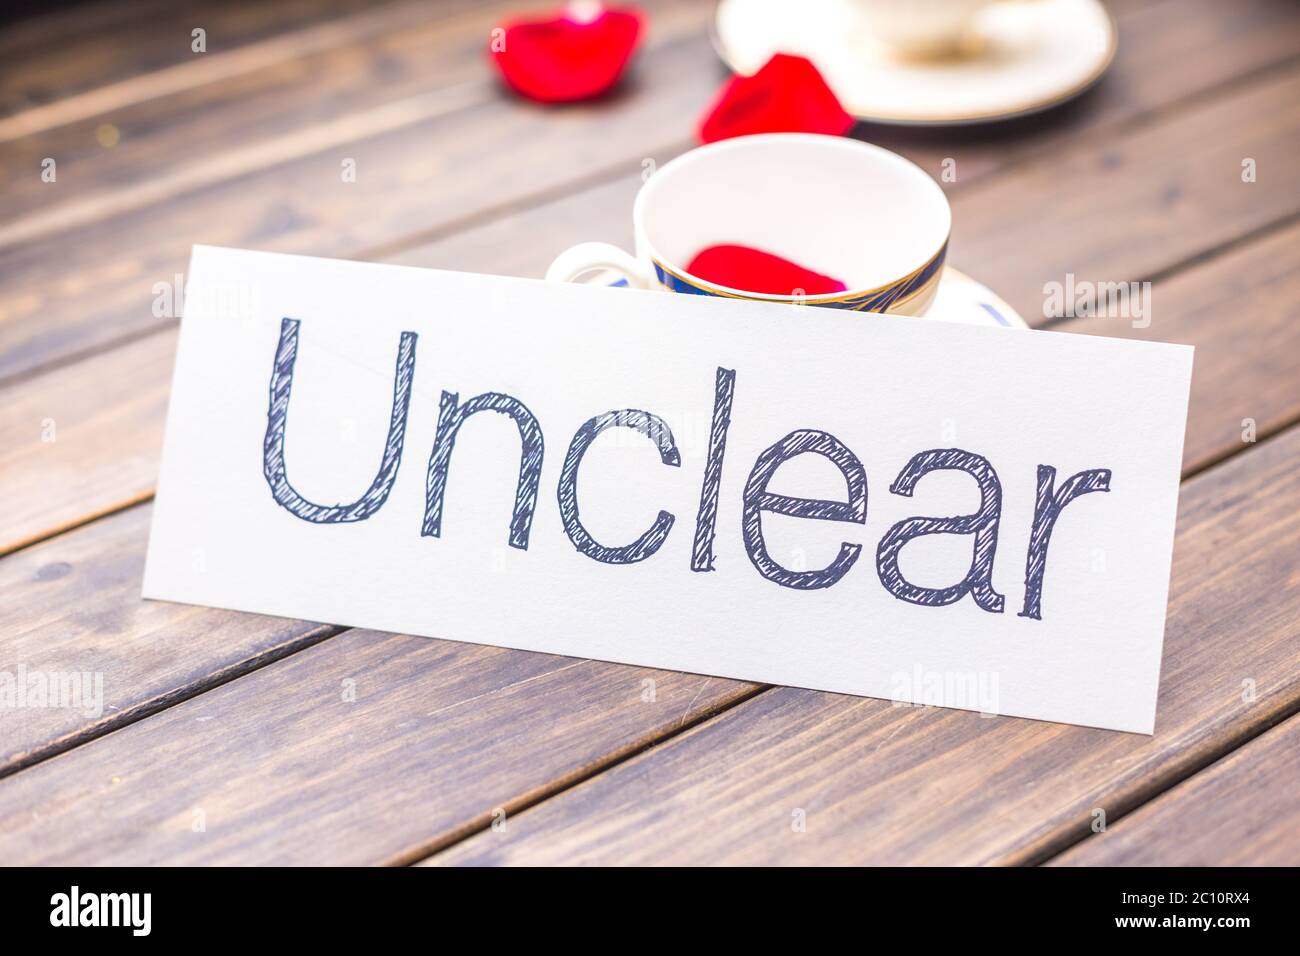 unclear to clear on white paper Stock Photo